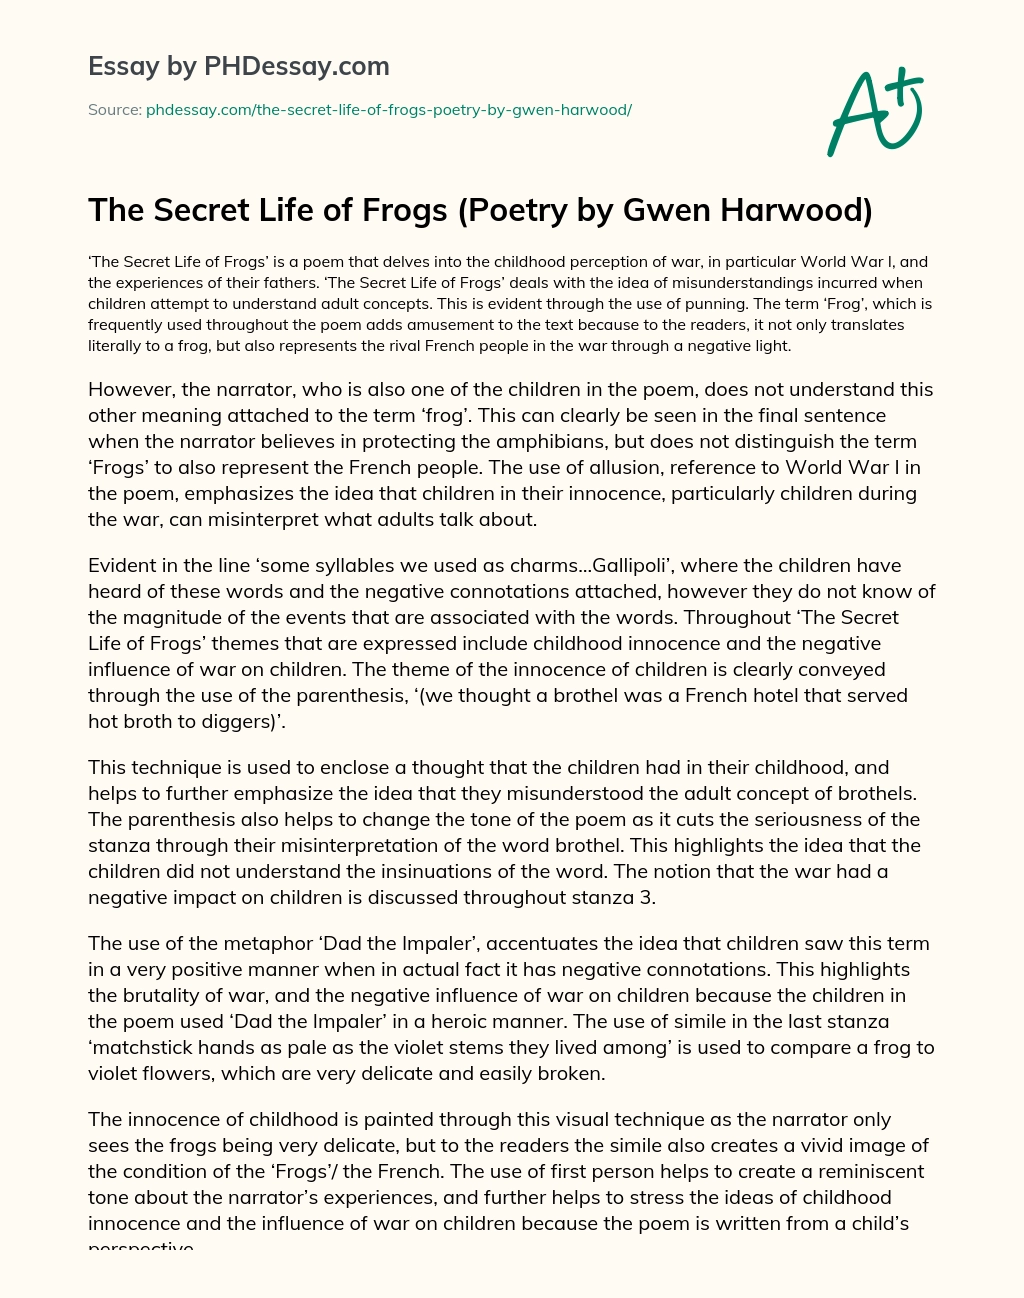 The Secret Life of Frogs (Poetry by Gwen Harwood) essay